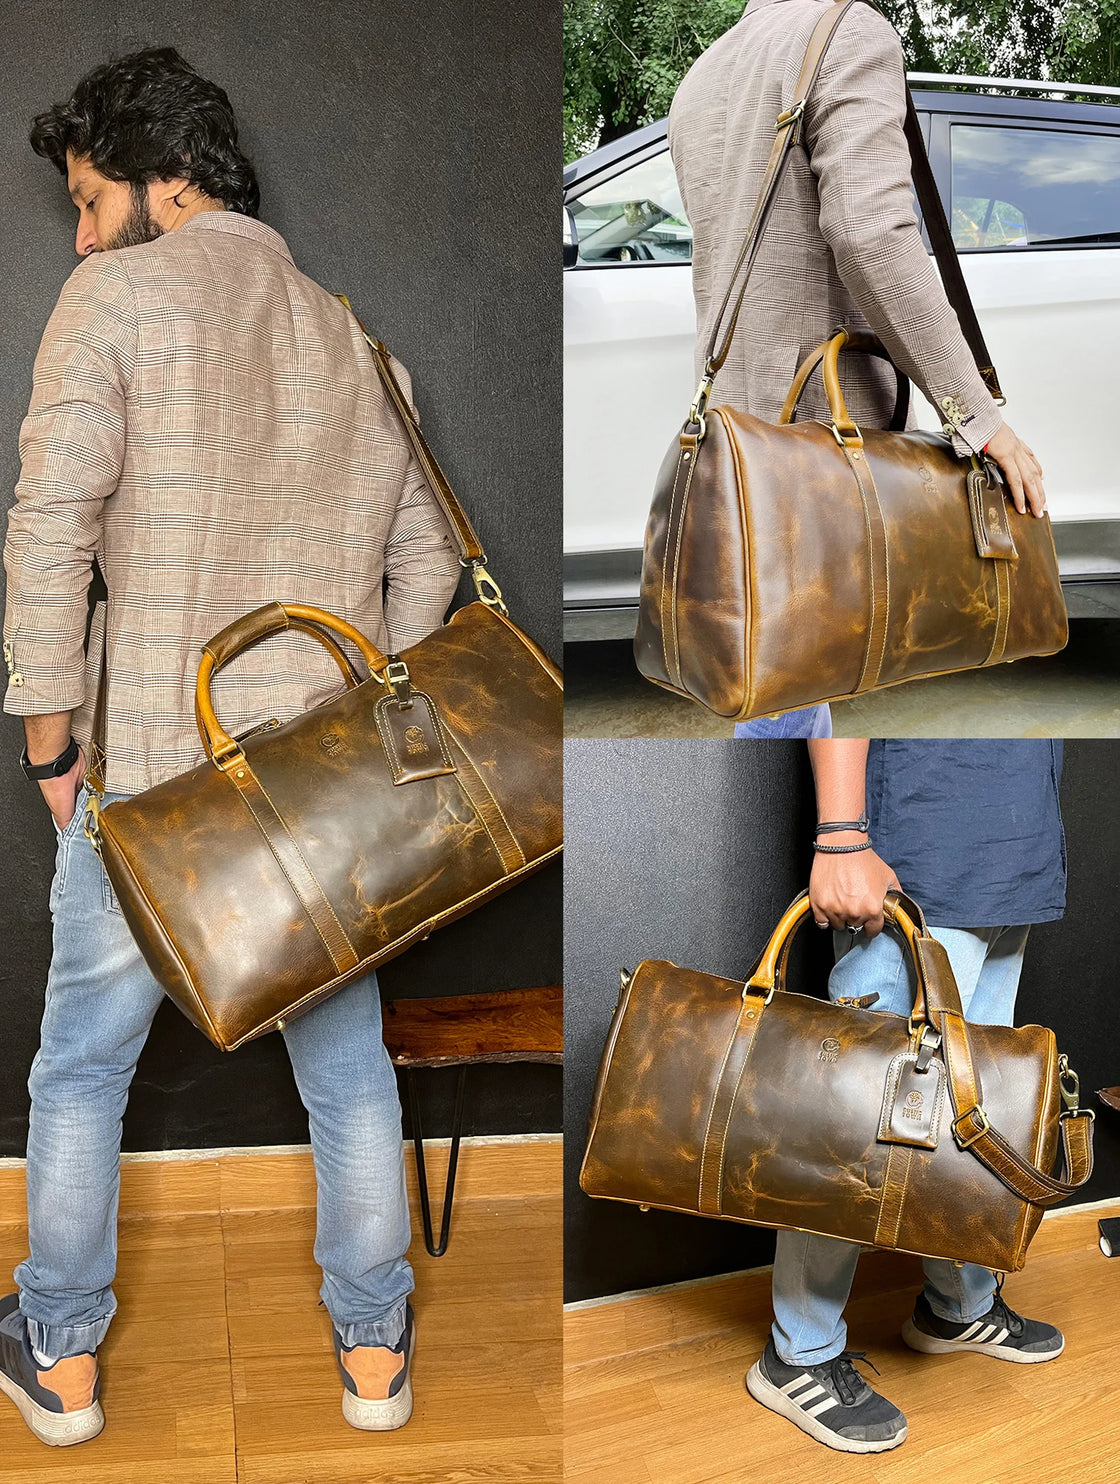 Rustic Leather Travel Duffel Bag — High On Leather